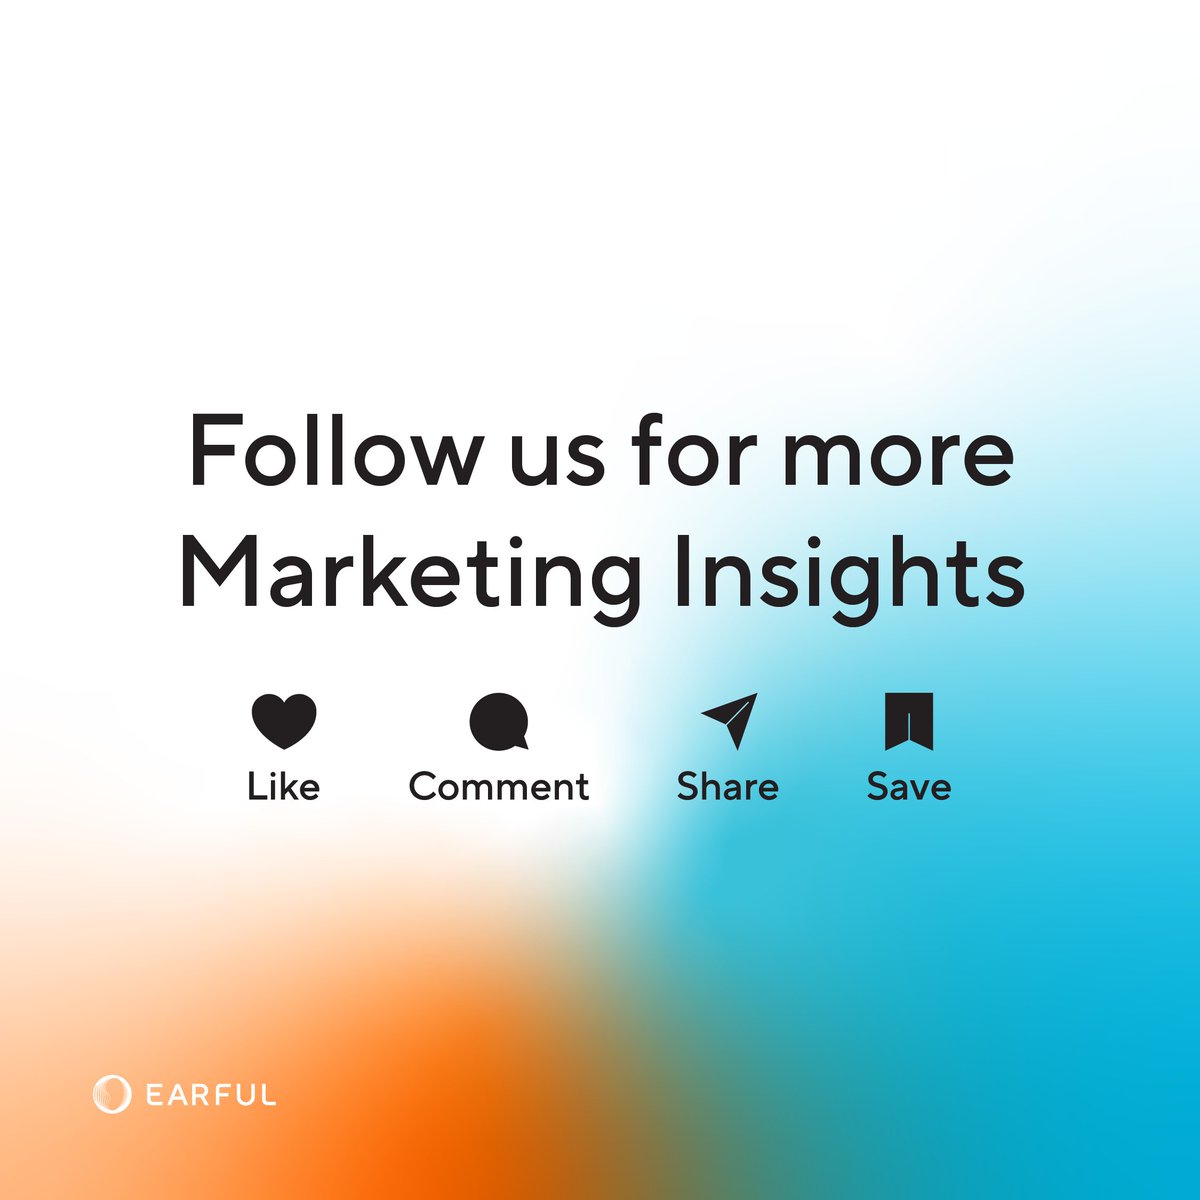 Empower your campaigns with EARFUL! 📊✨

From pre-campaign to post-campaign, we provide valuable insights for success.

#EARFUL #PR #sociallistening #brandsafety #brandreputation #marketintelligence #marketing #socialmedia #data #insight #analytics #campaign #sentiment #monitor